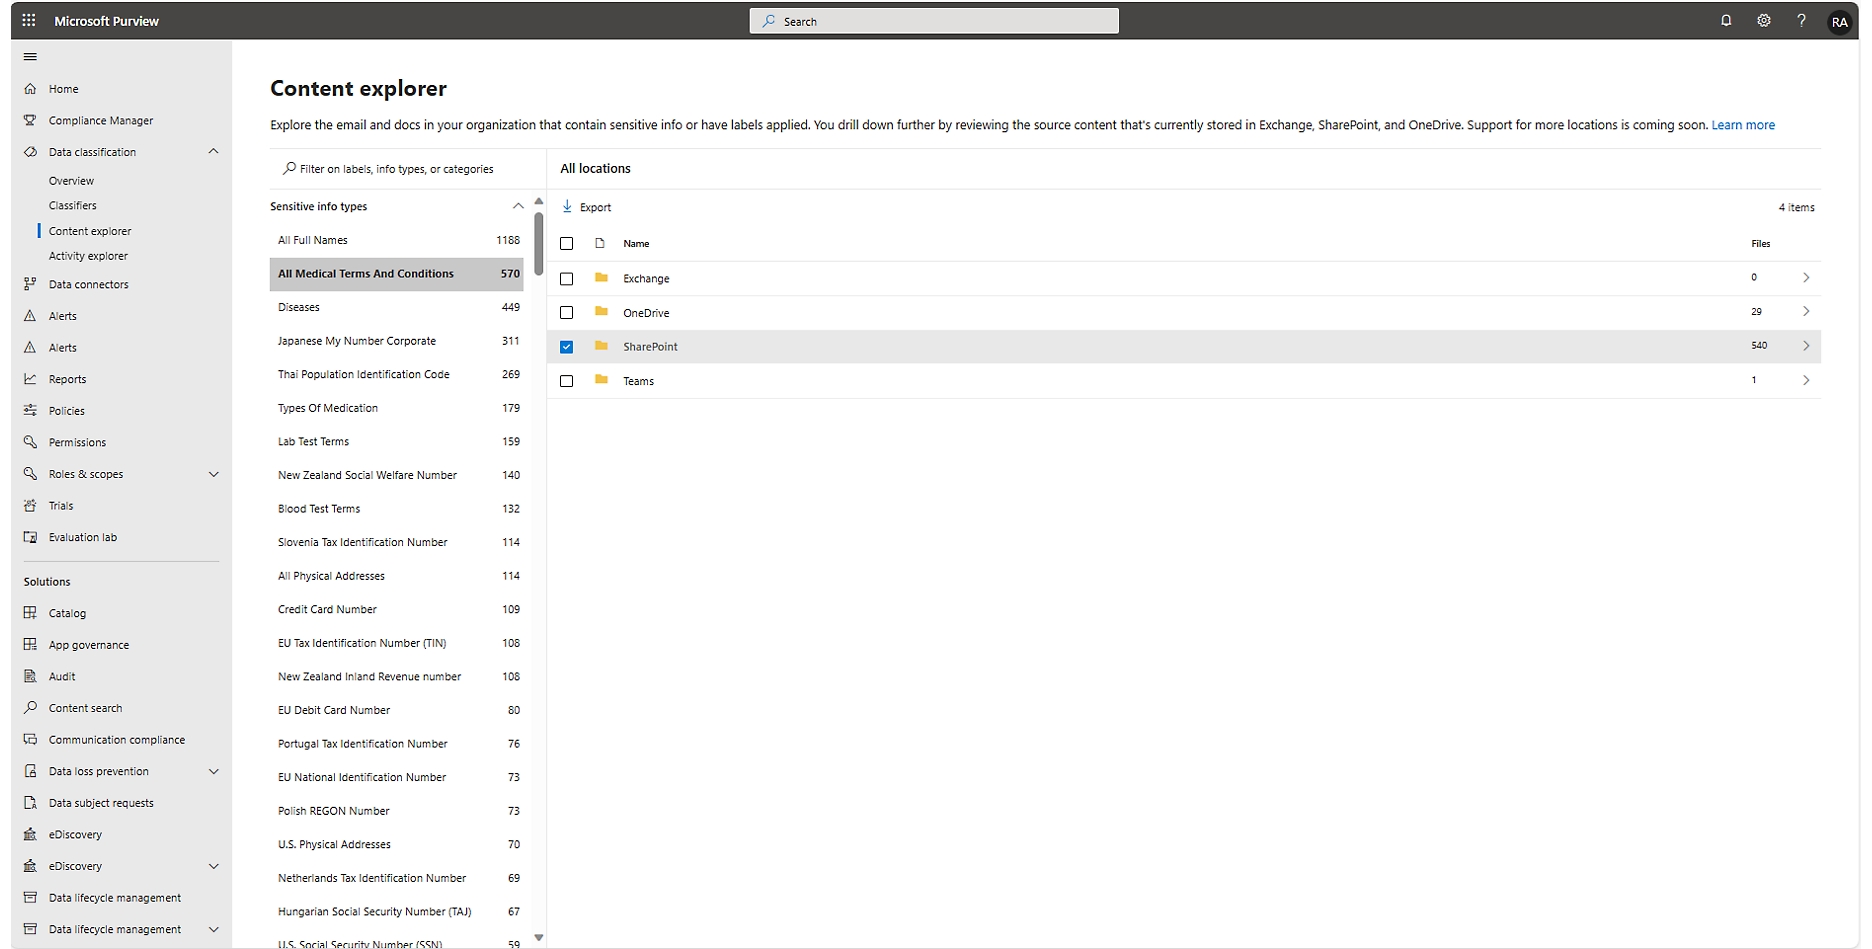 Microsoft purview content explorer interface showing filtered results for sensitive information in various documents